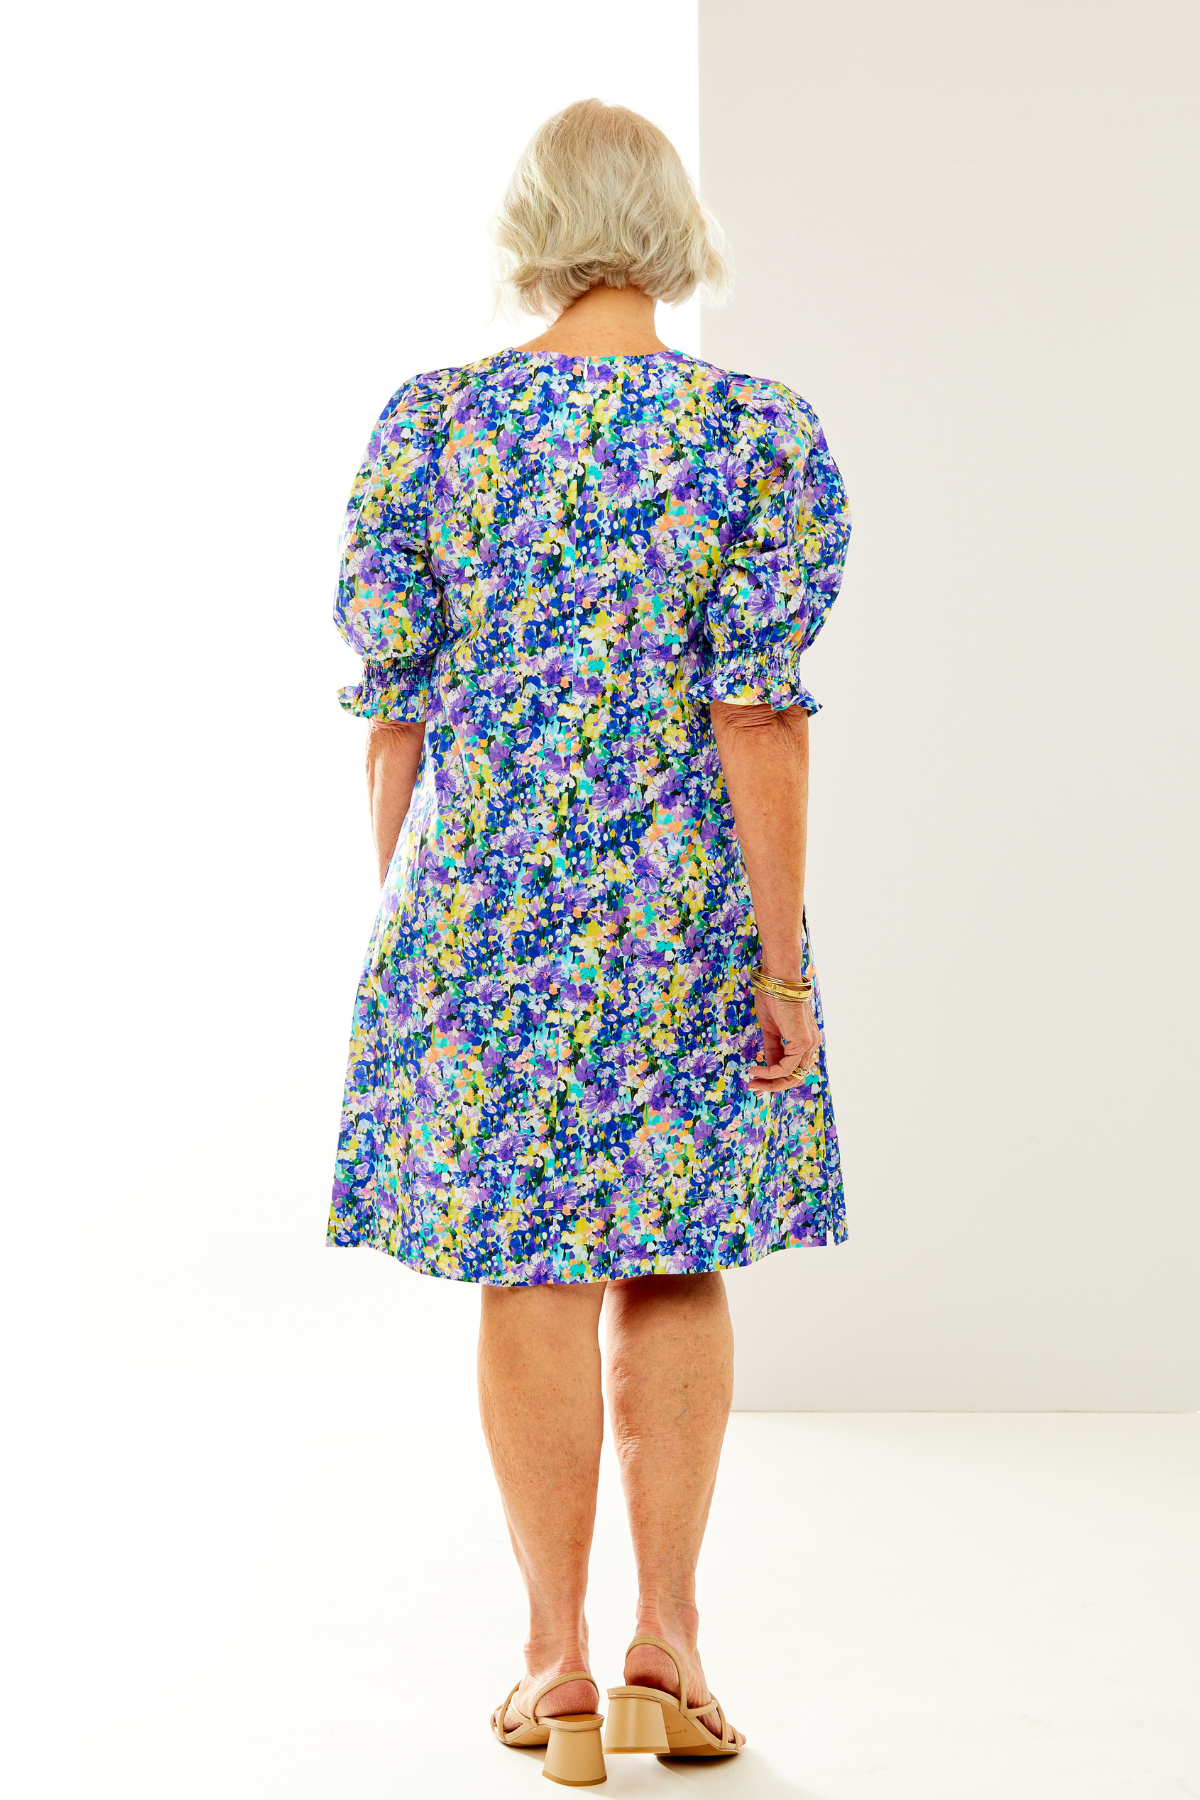 Woman in floral printed dress